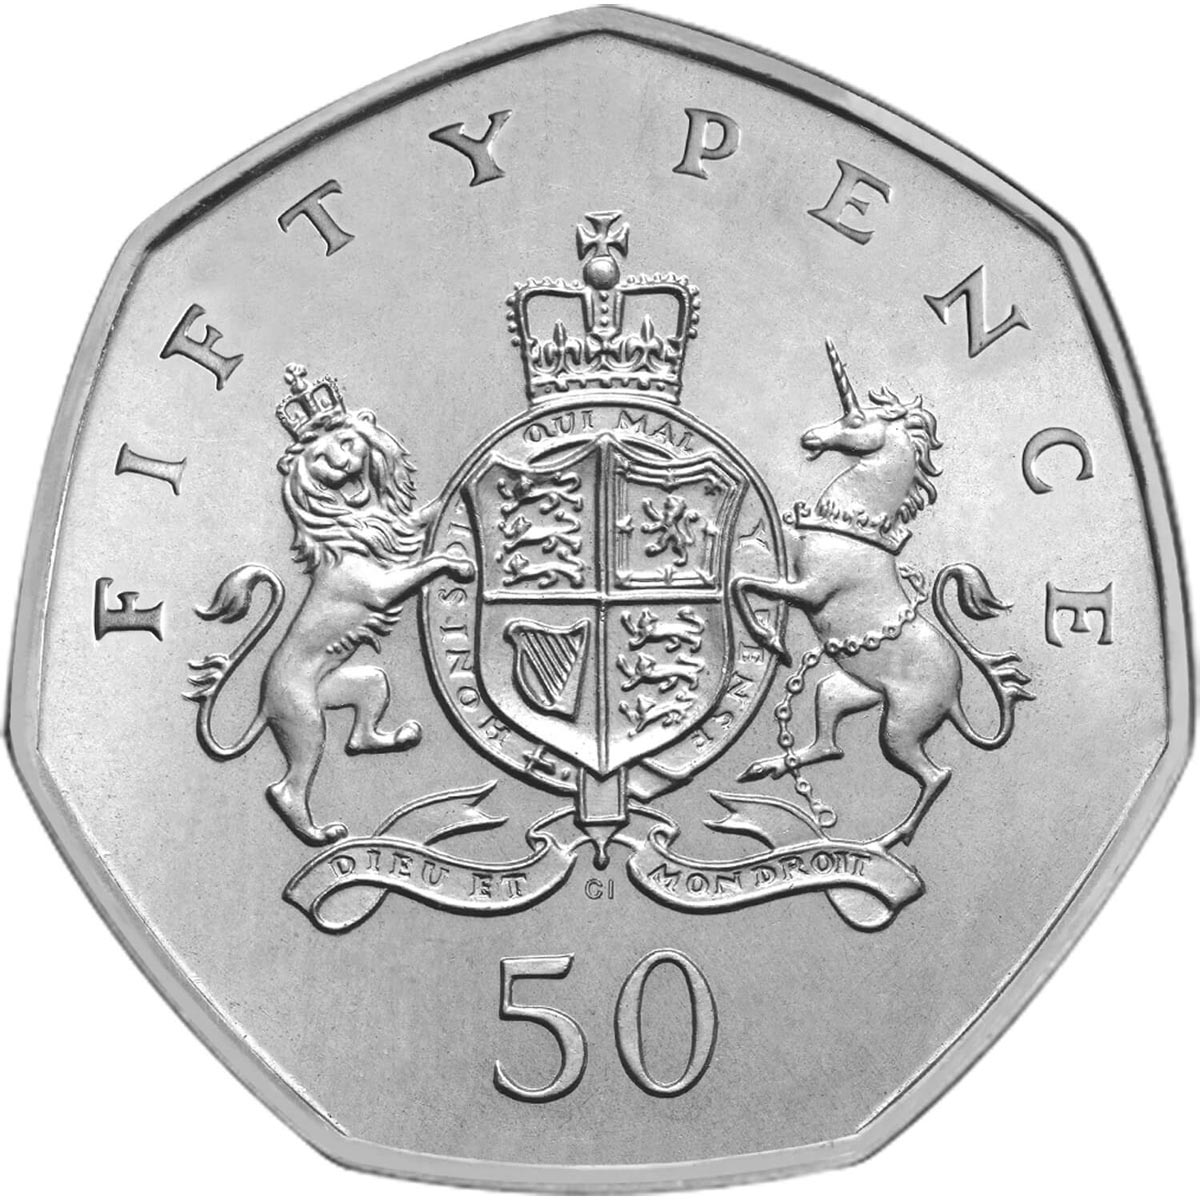 50 pence coins